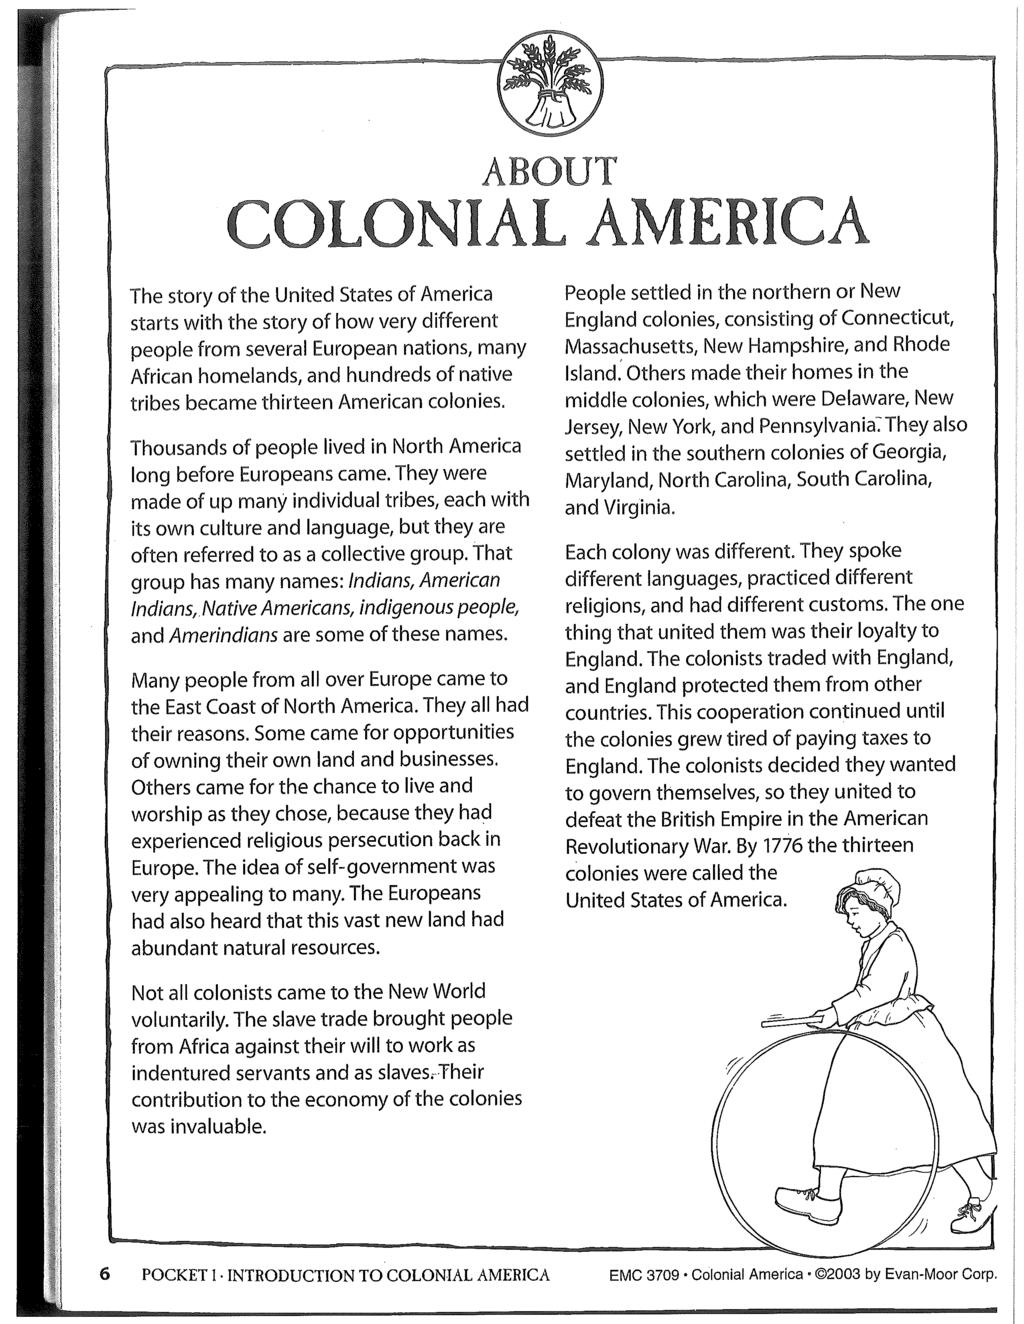 ABOUT COLONAL AMERCA The story of the United States of America starts with the story of how very different people from several European nations, many African homelands, and hundreds of native tribes